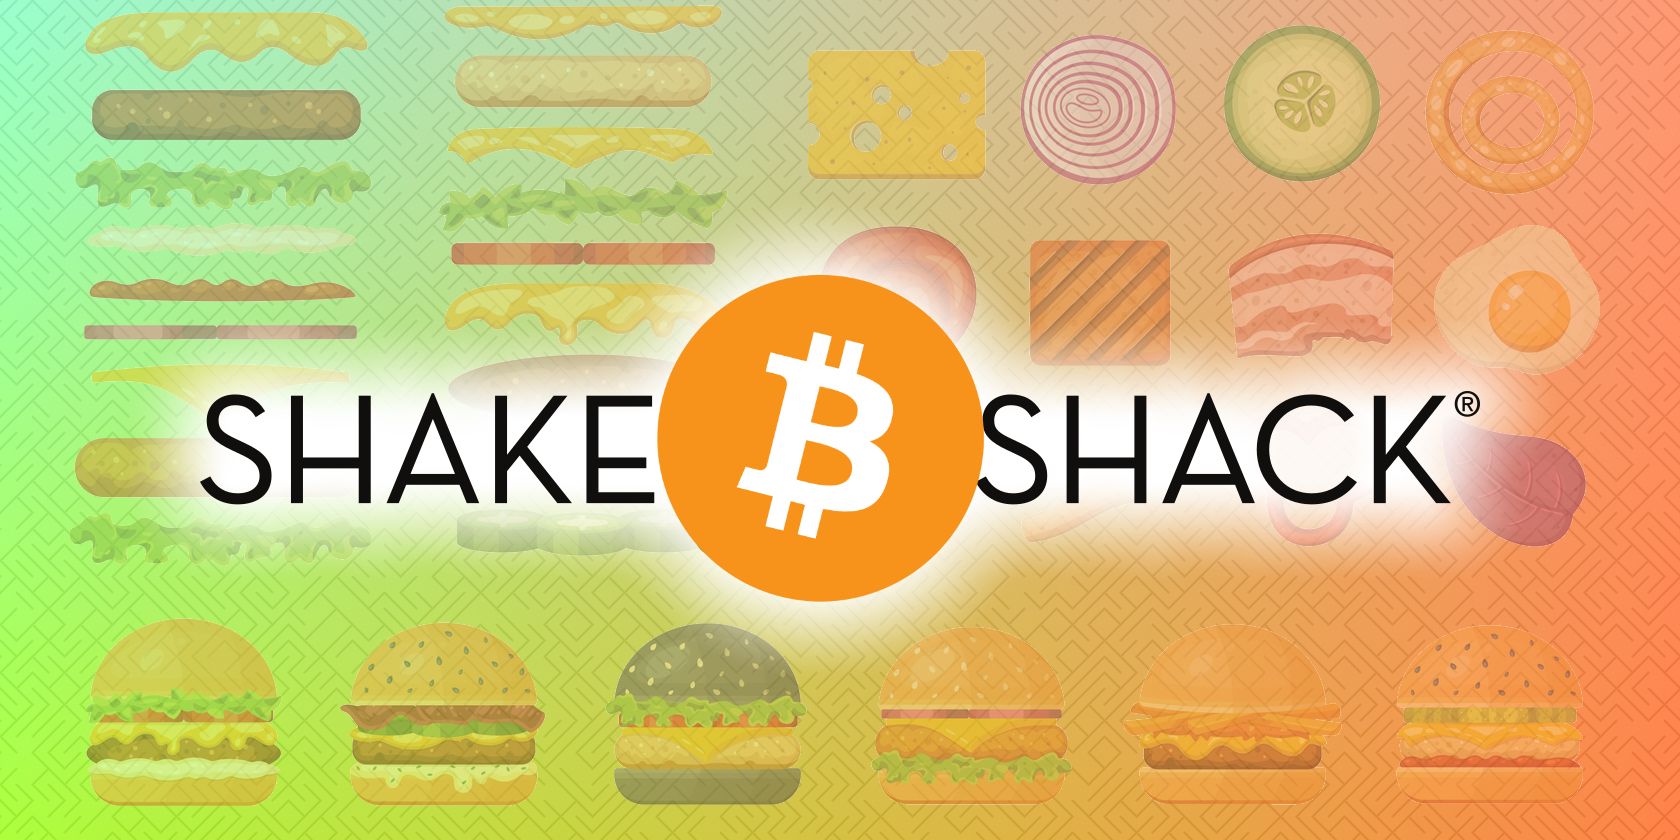 Shake shack crypto can we buy bitcoins in fractions